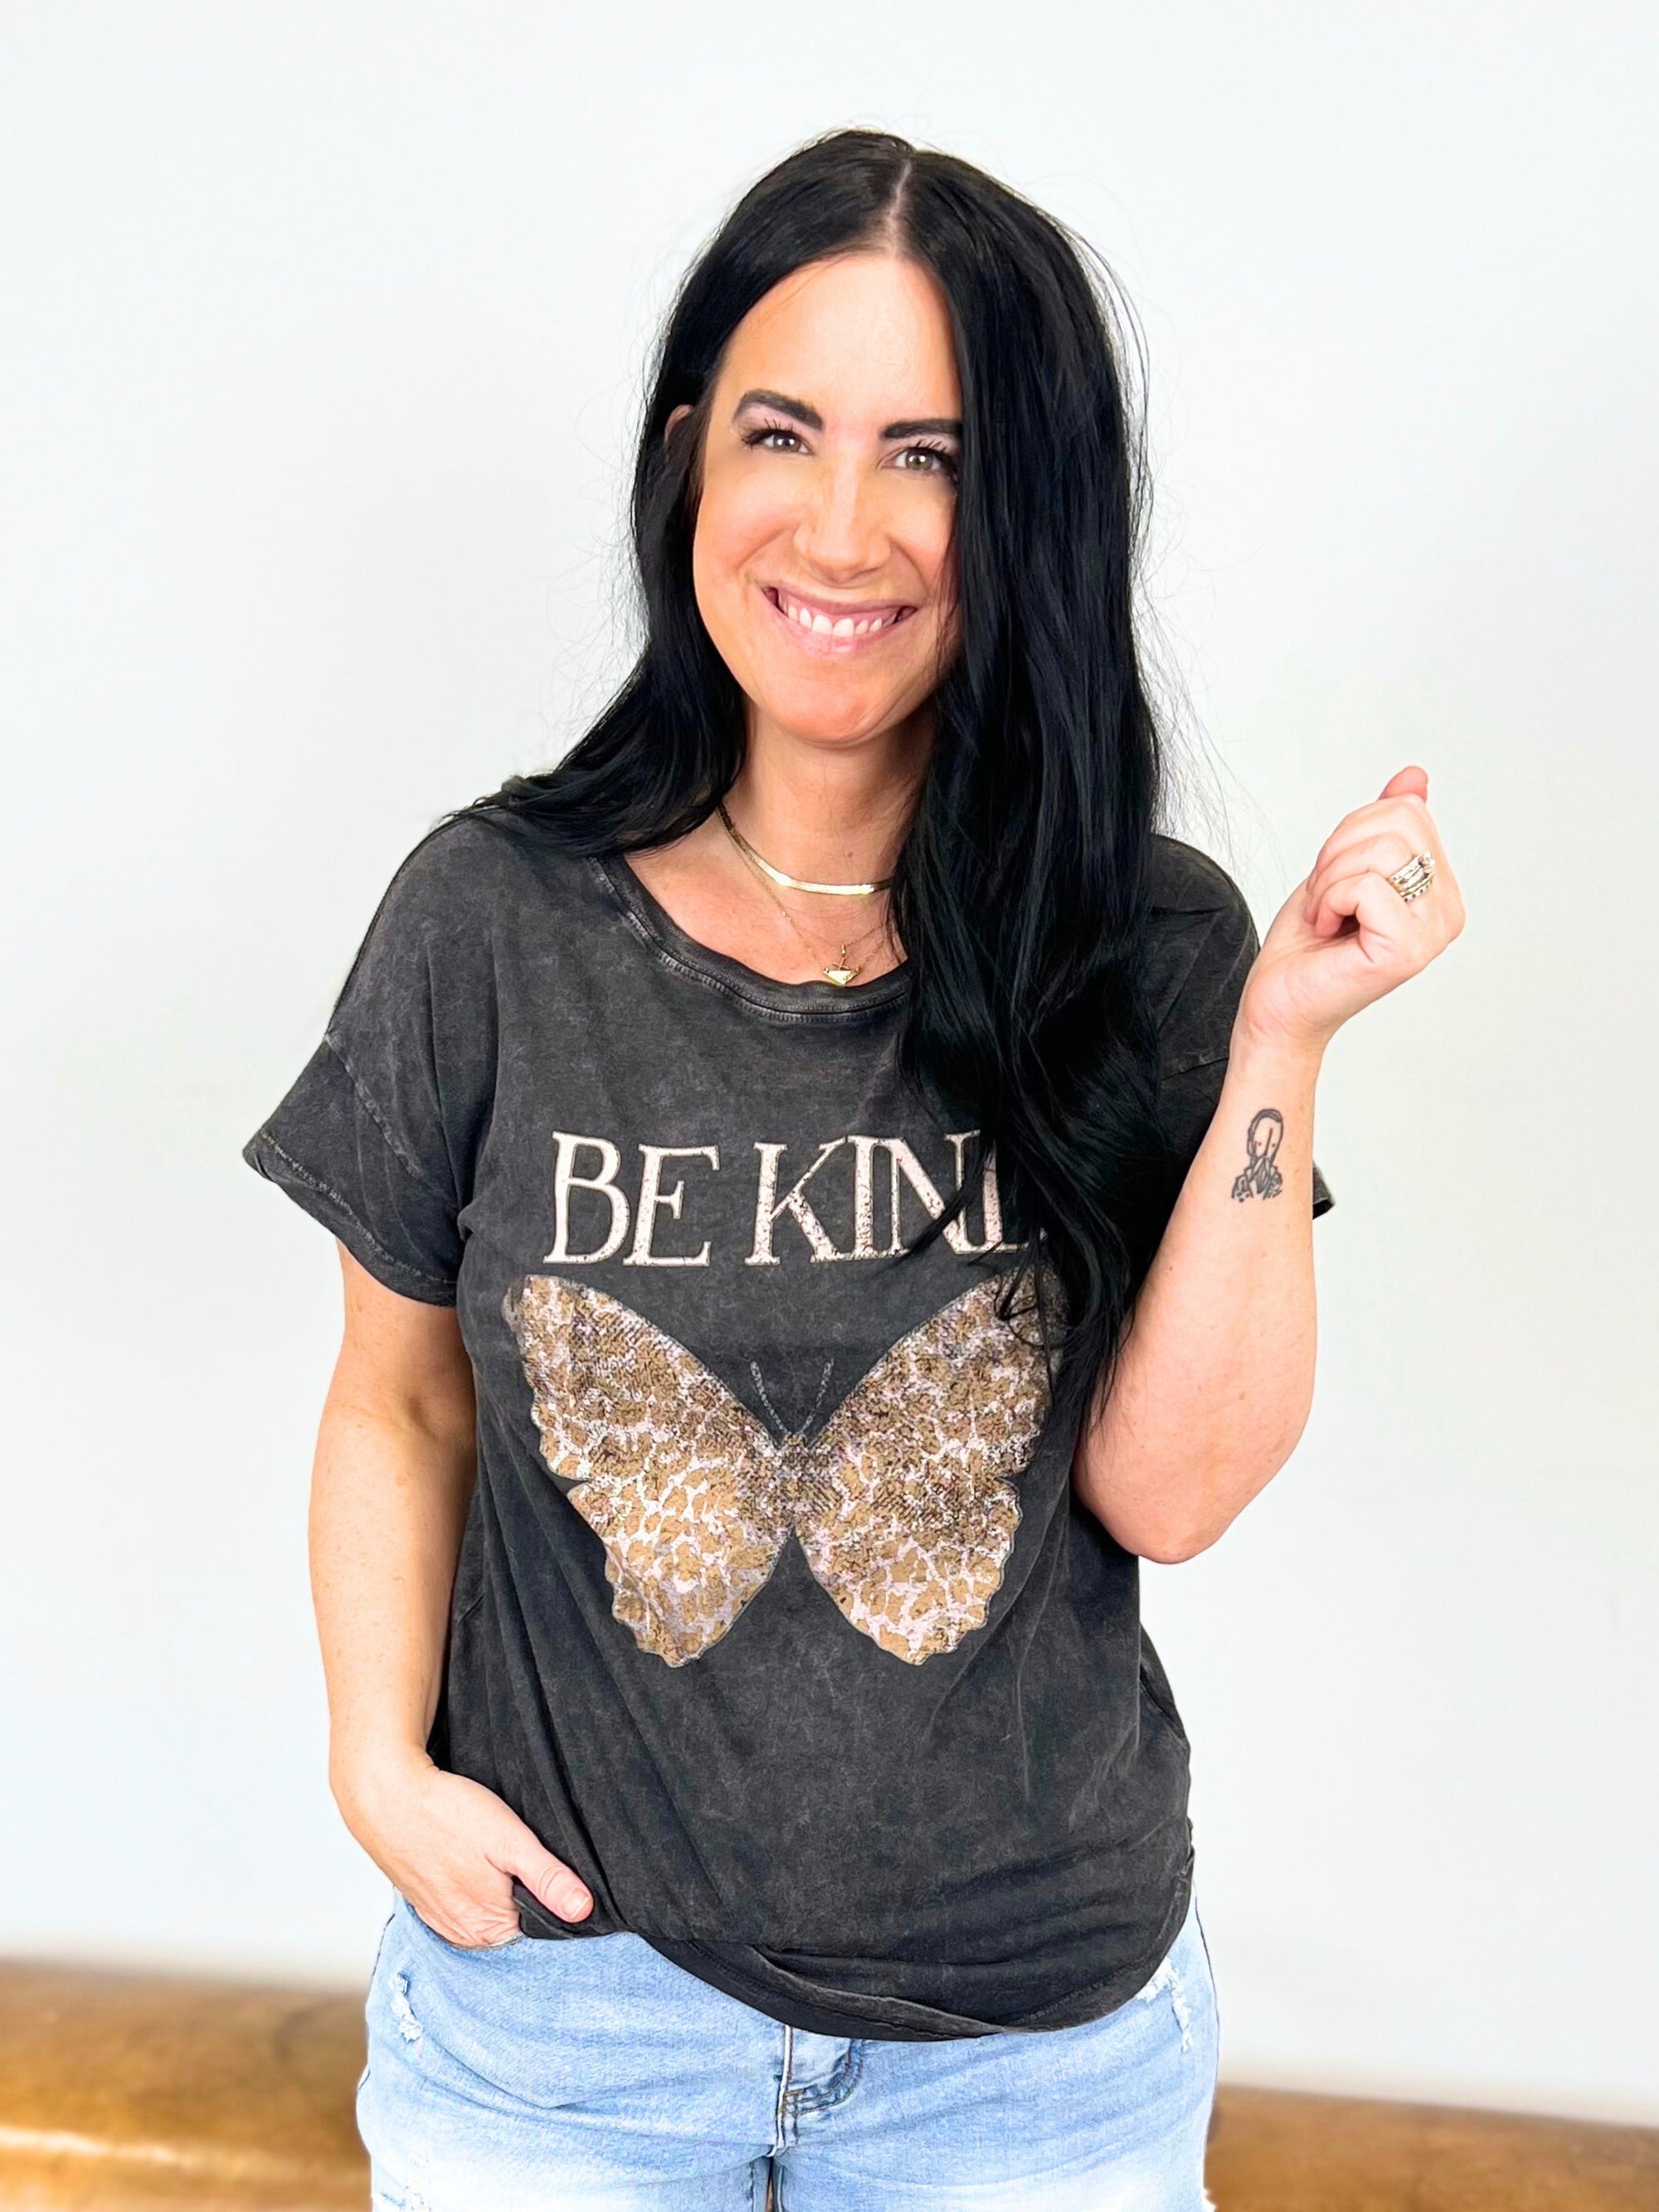 The "Be Kind" Butterfly Print Graphic Tee